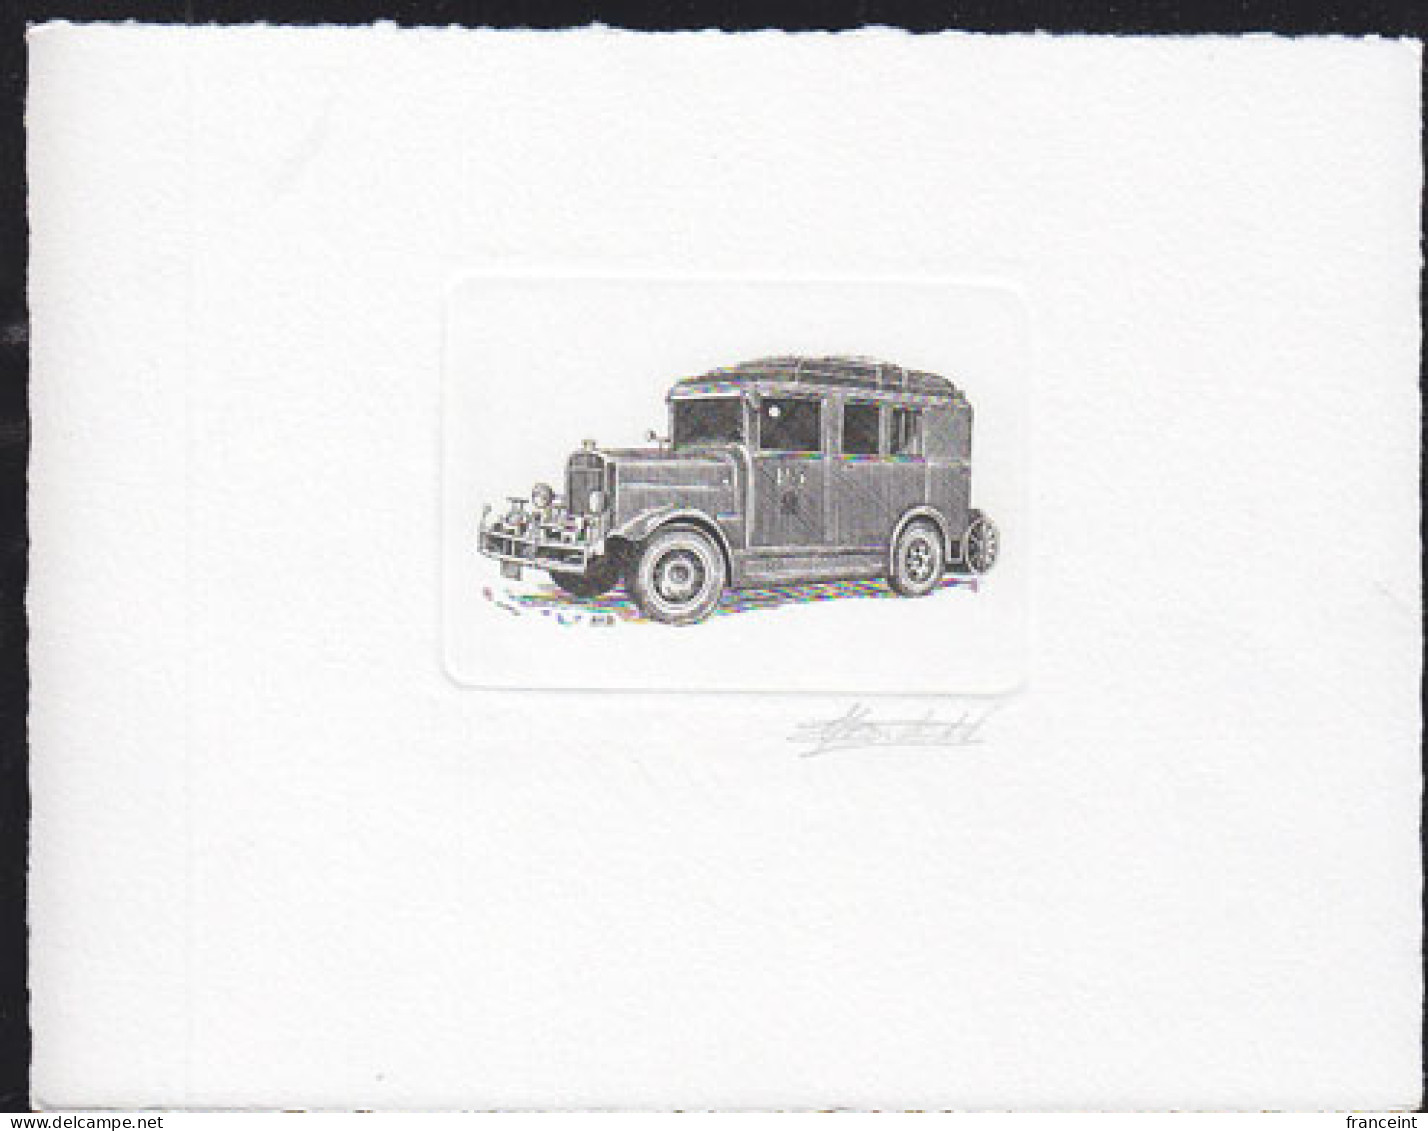 BELGIUM(1992) Old Fire Truck. Die Proof In Black Signed By The Engraver, Representing The FDC Cachet. Scott No 1426 - Proofs & Reprints